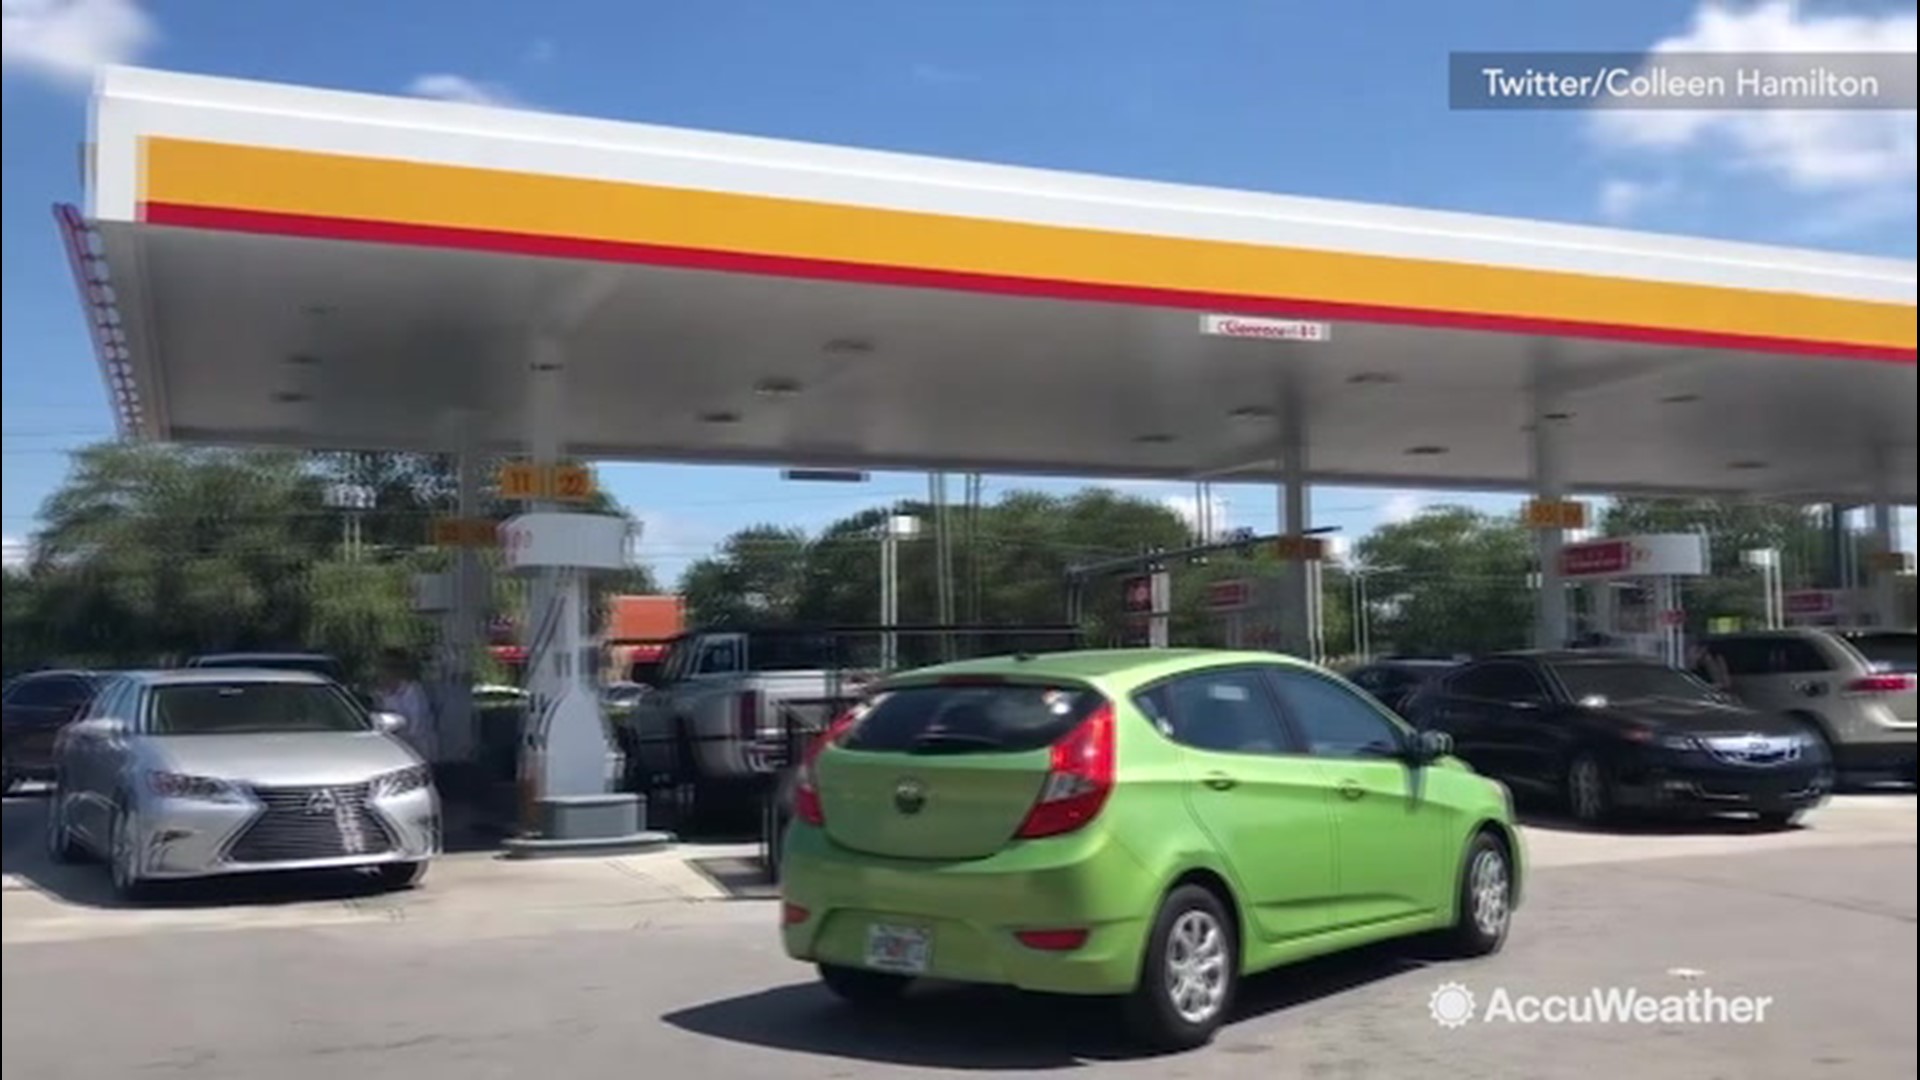 It's a frantic scene at this gas station in Dunedin, Florida, on Aug. 29, as people rush to stock up on gas to evacuate out of the path of Hurricane Dorian.